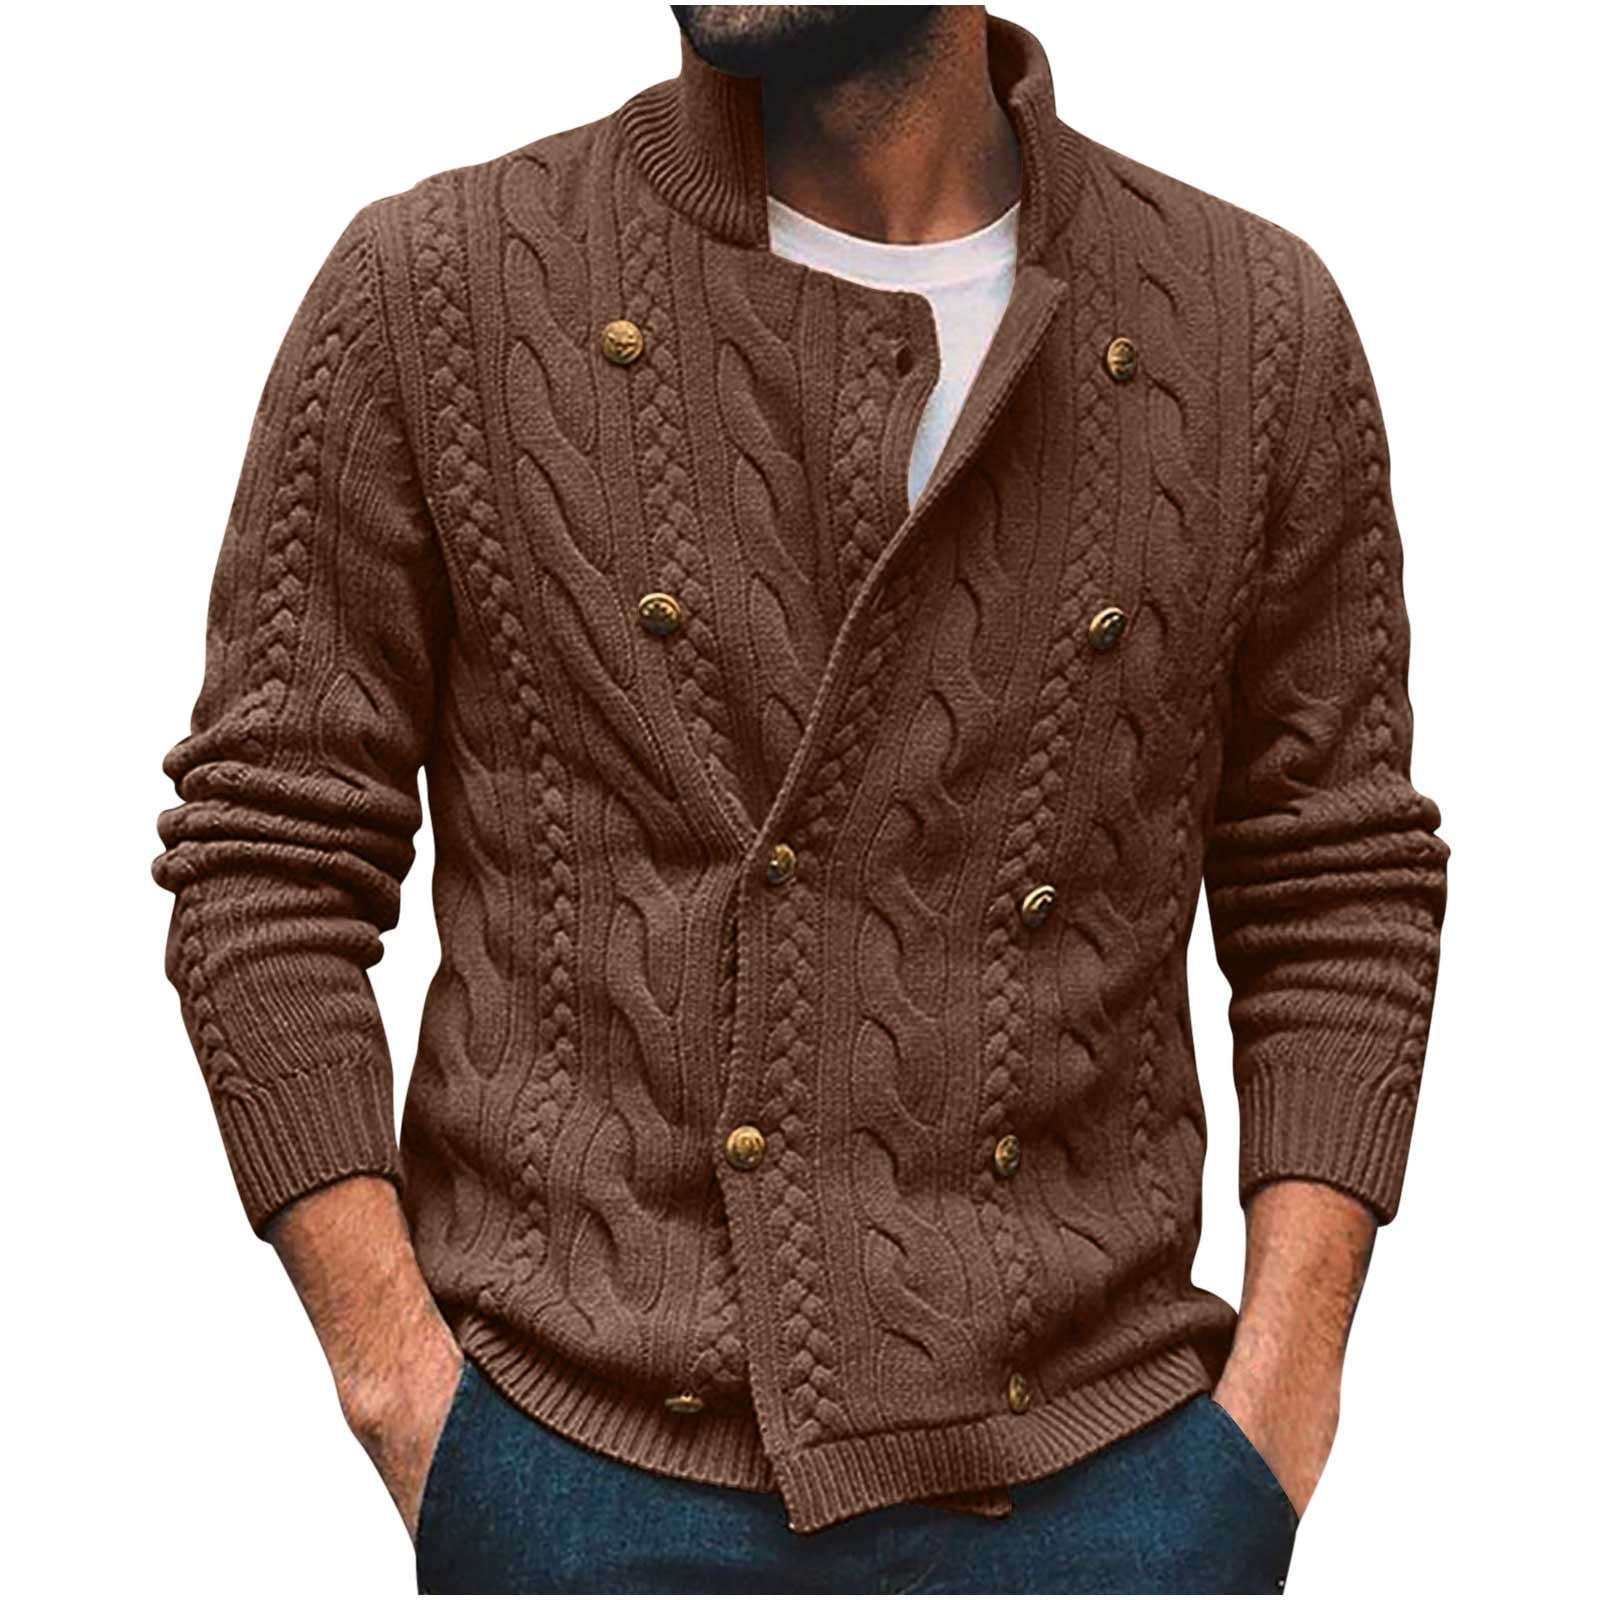 XFLWAM Men's Cardigan Sweaters Stand Collar Open Front Cable Knitted ...